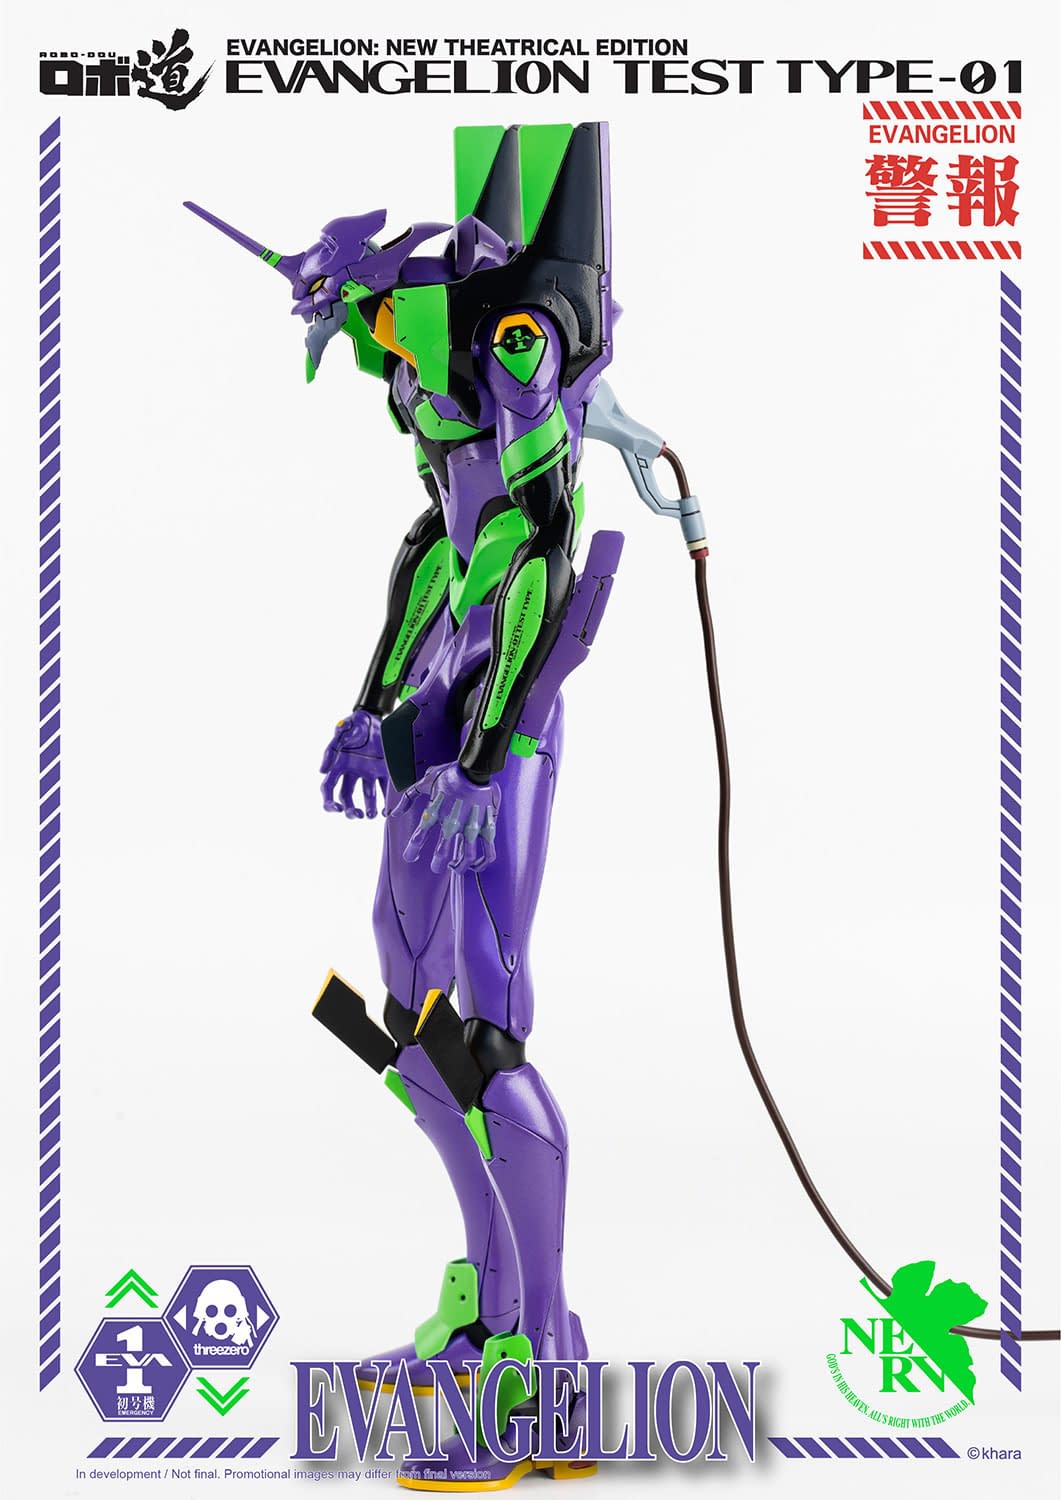 "Evangelion" Is Getting a Theatrical Edition Figure from Threezero